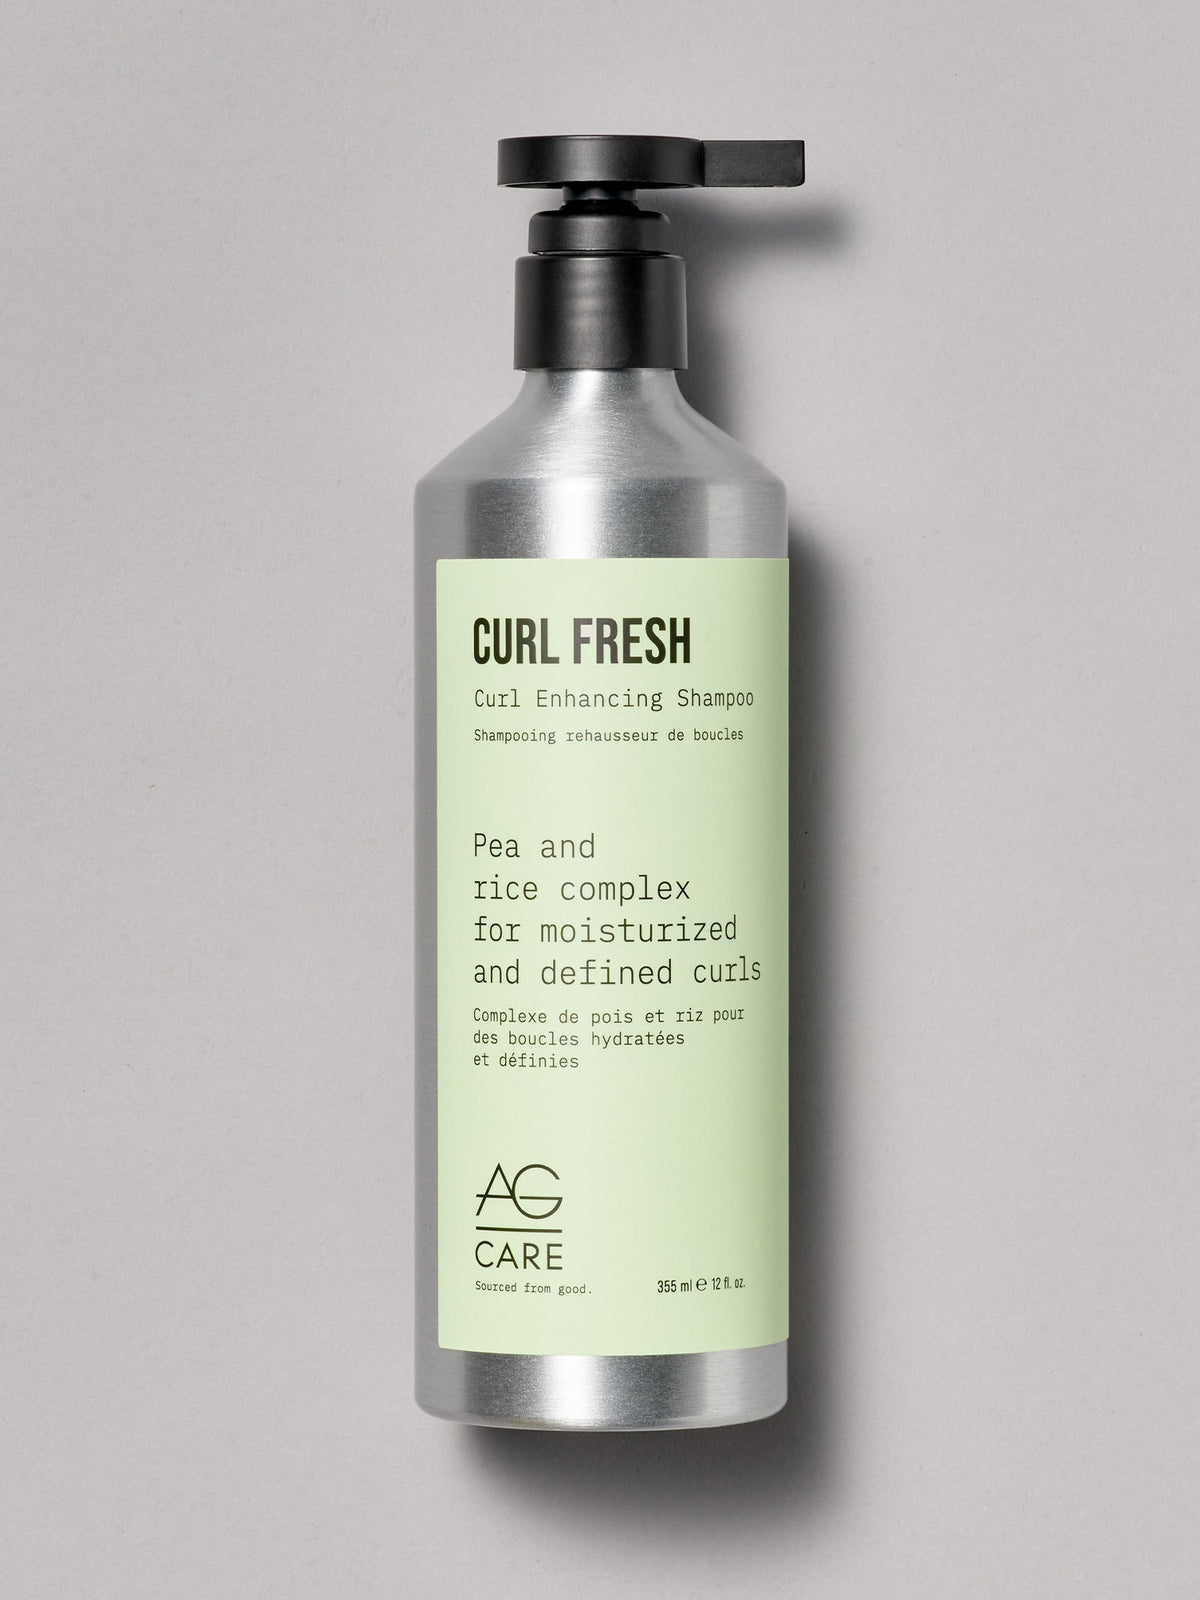 AG Haire Curl Fresh Curl Enhancing Sulfate-Free Shampoo